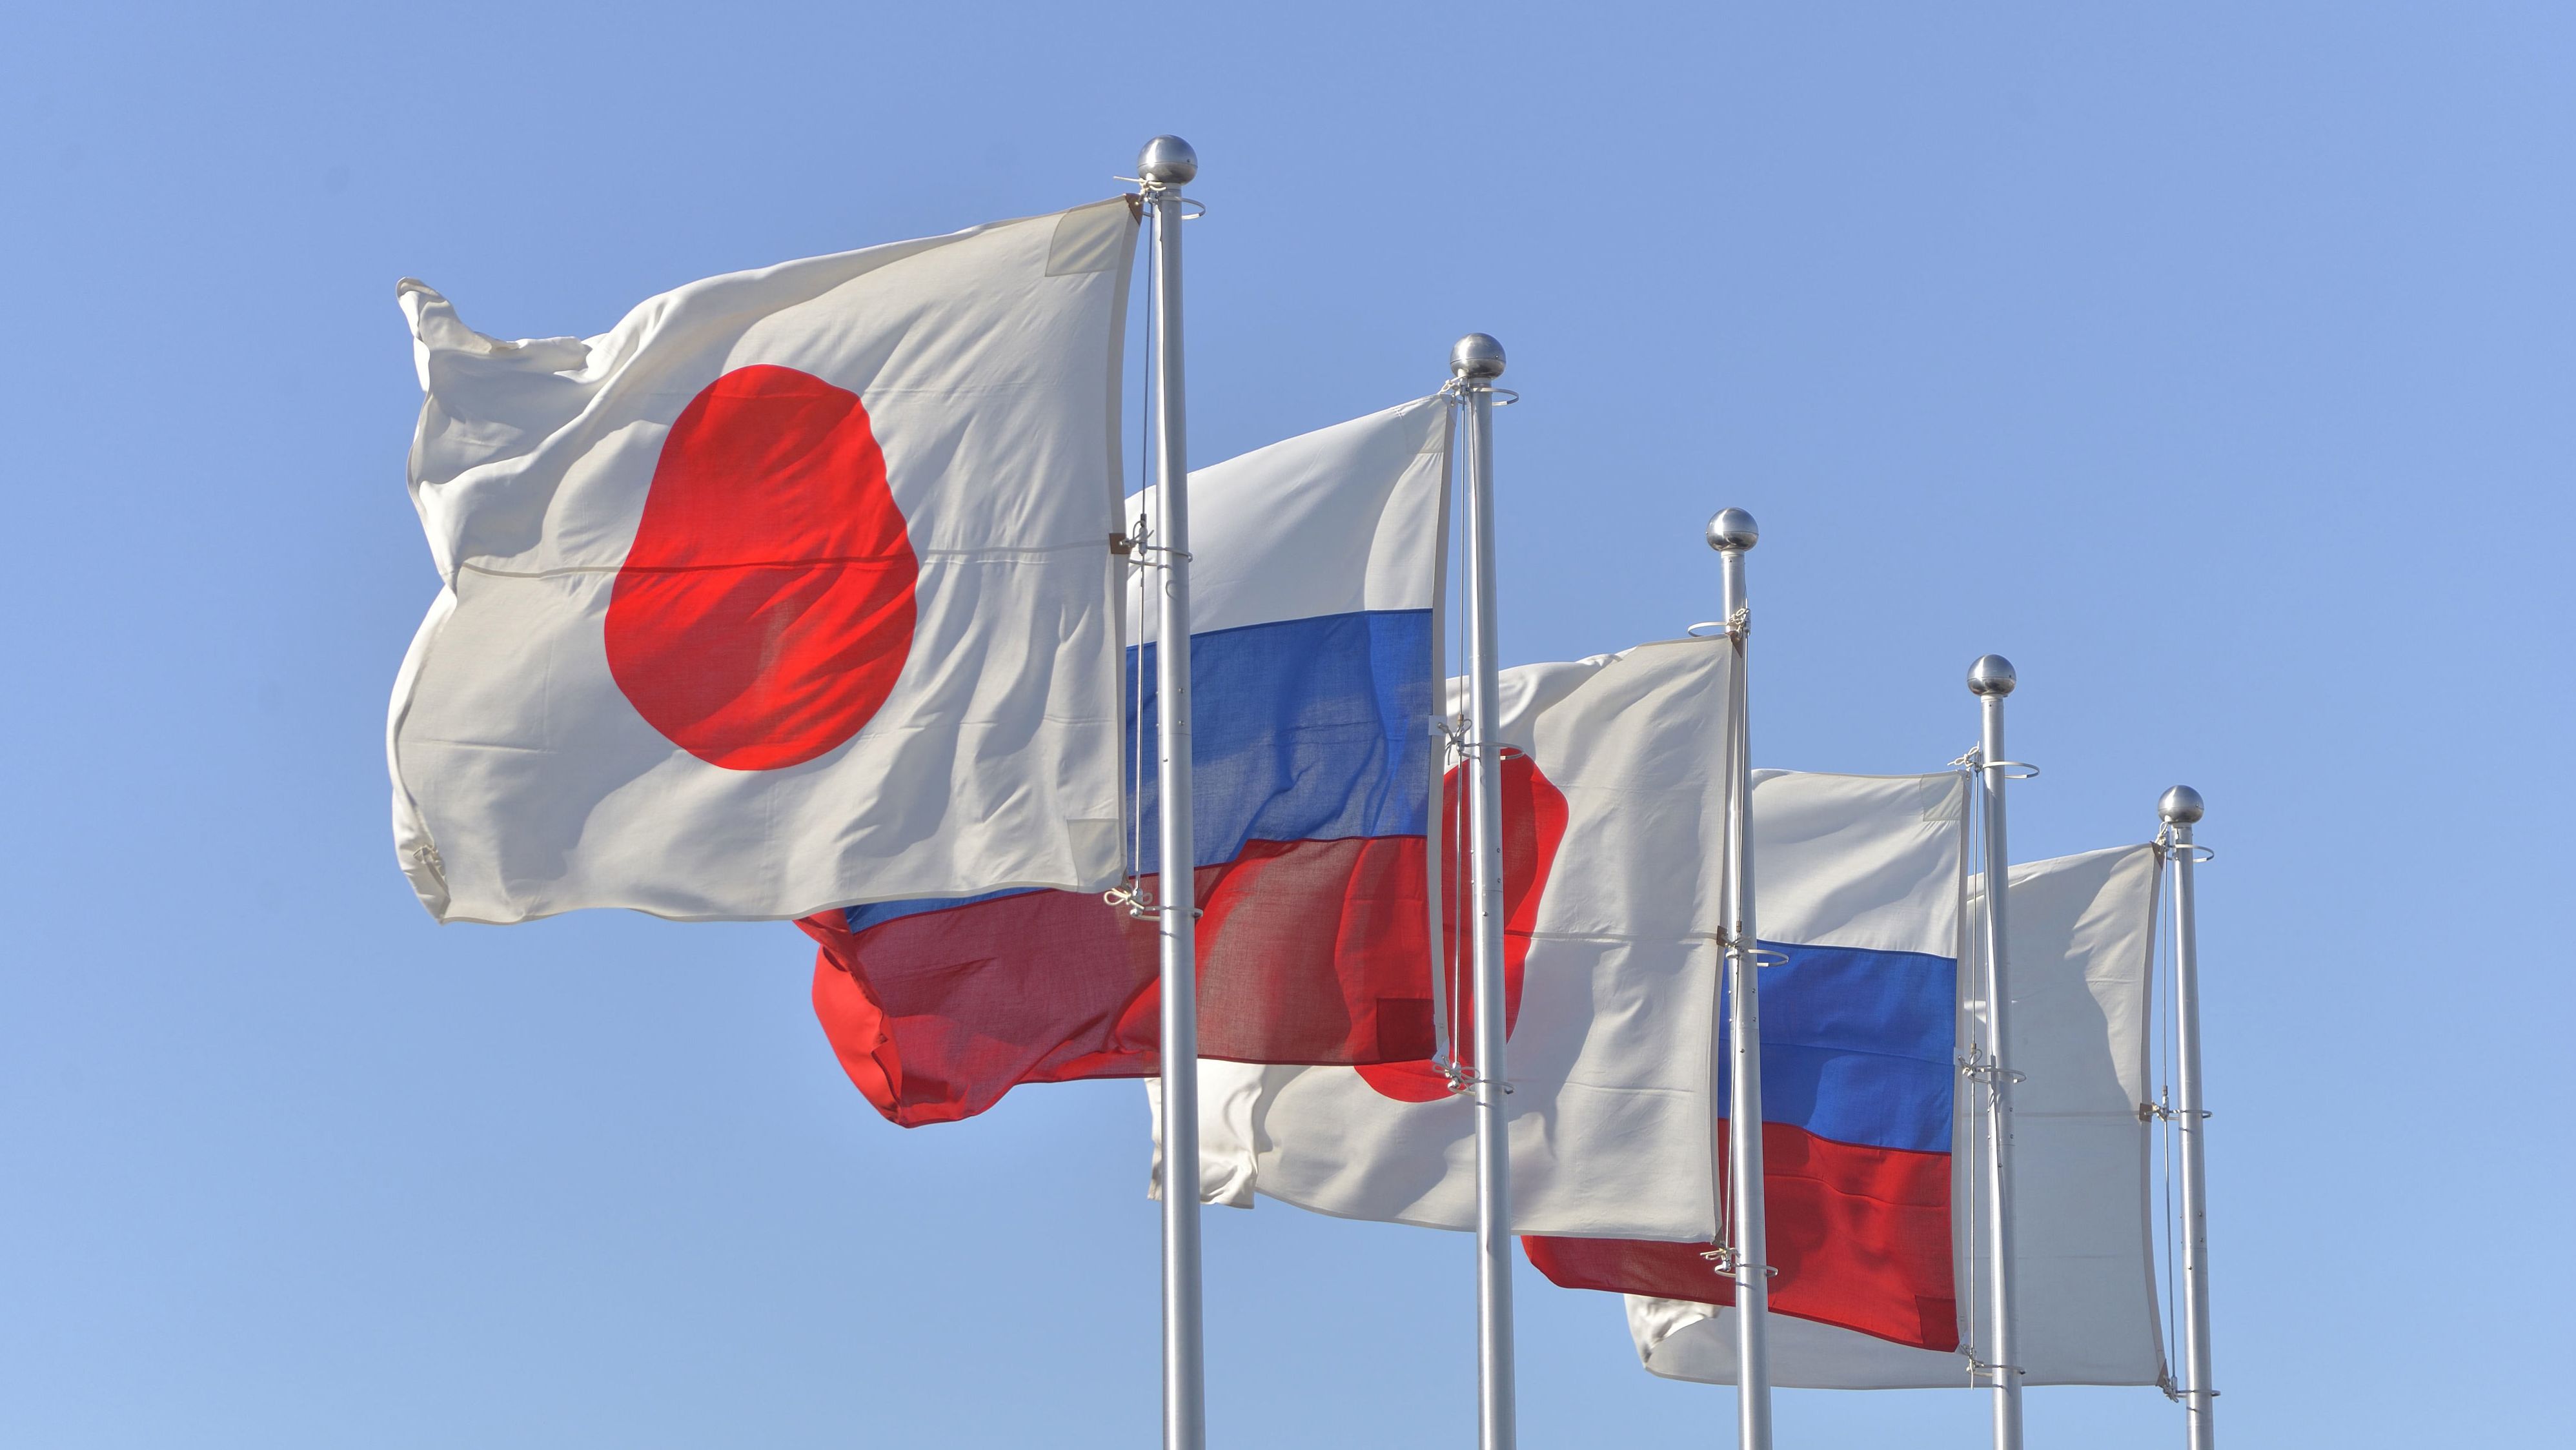 Japanese and Russian national flags flutters in the wind at the Haneda Airport in Tokyo, Japan.